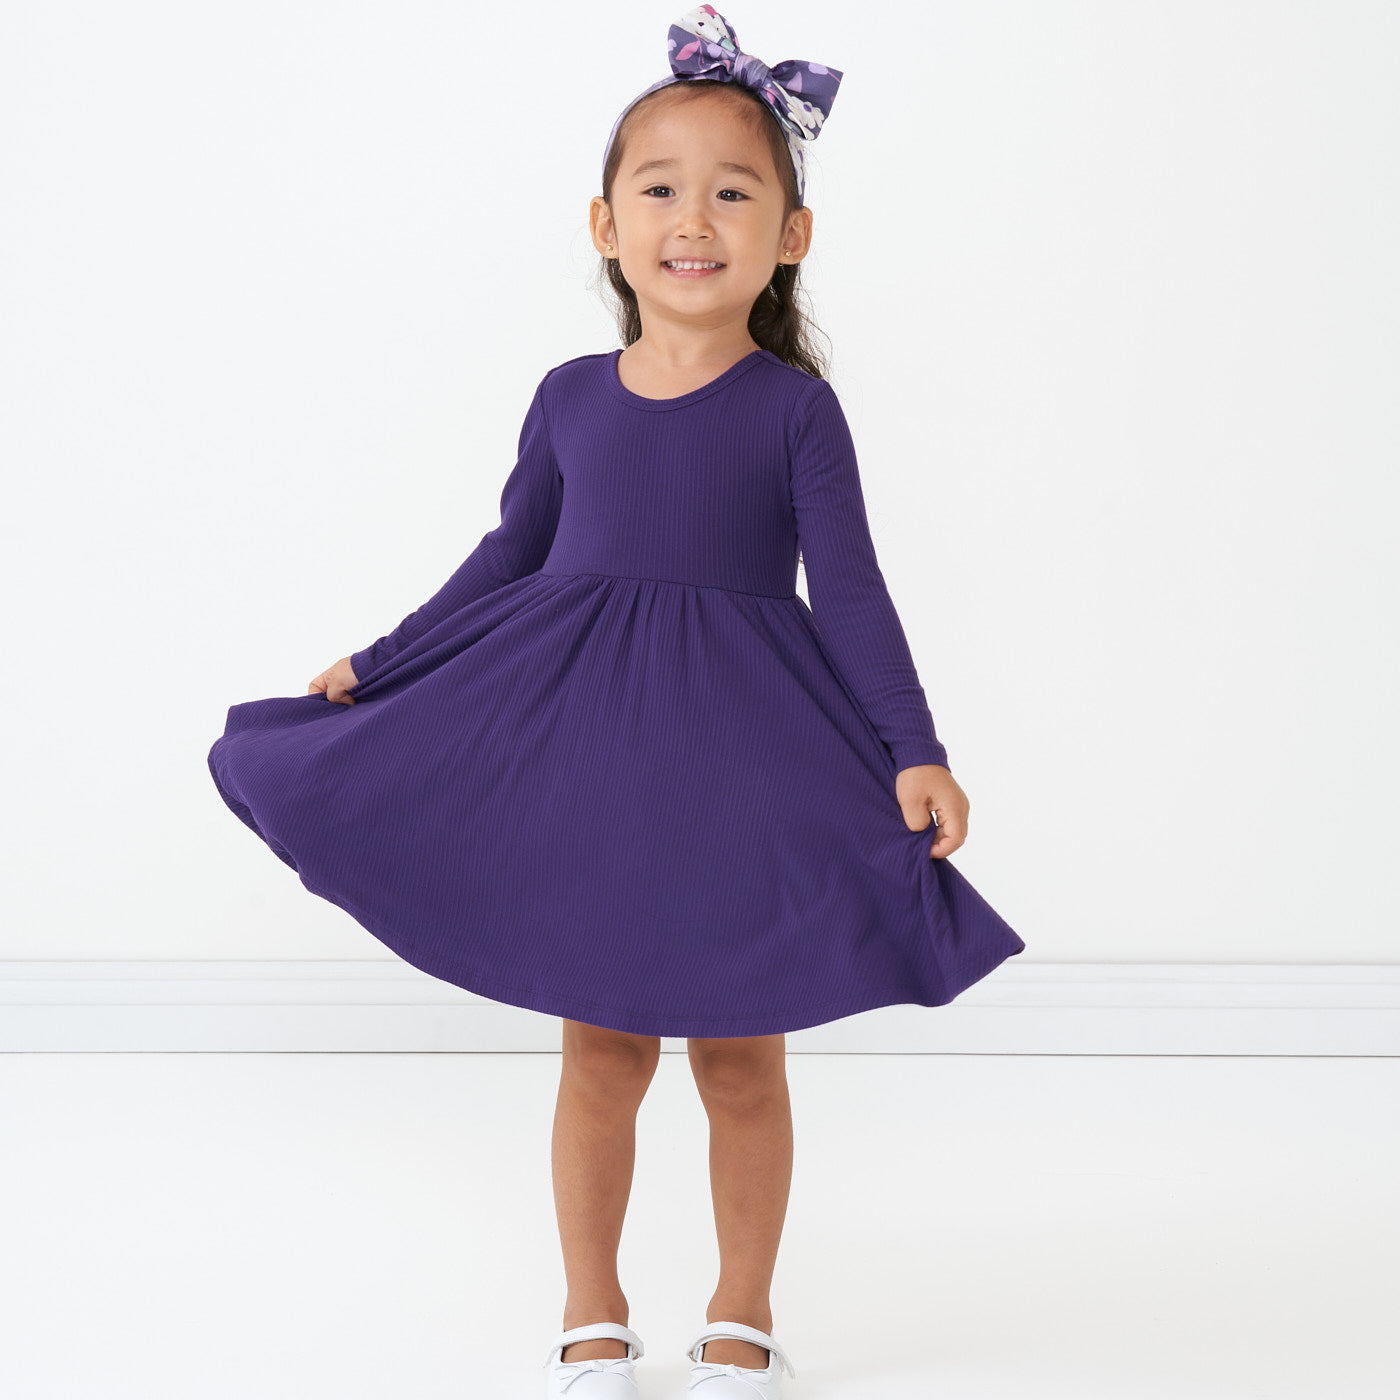 Child wearing a Deep Amethyst ribbed twirl dress and coordinating Sugar Plum Floral luxe bow headband